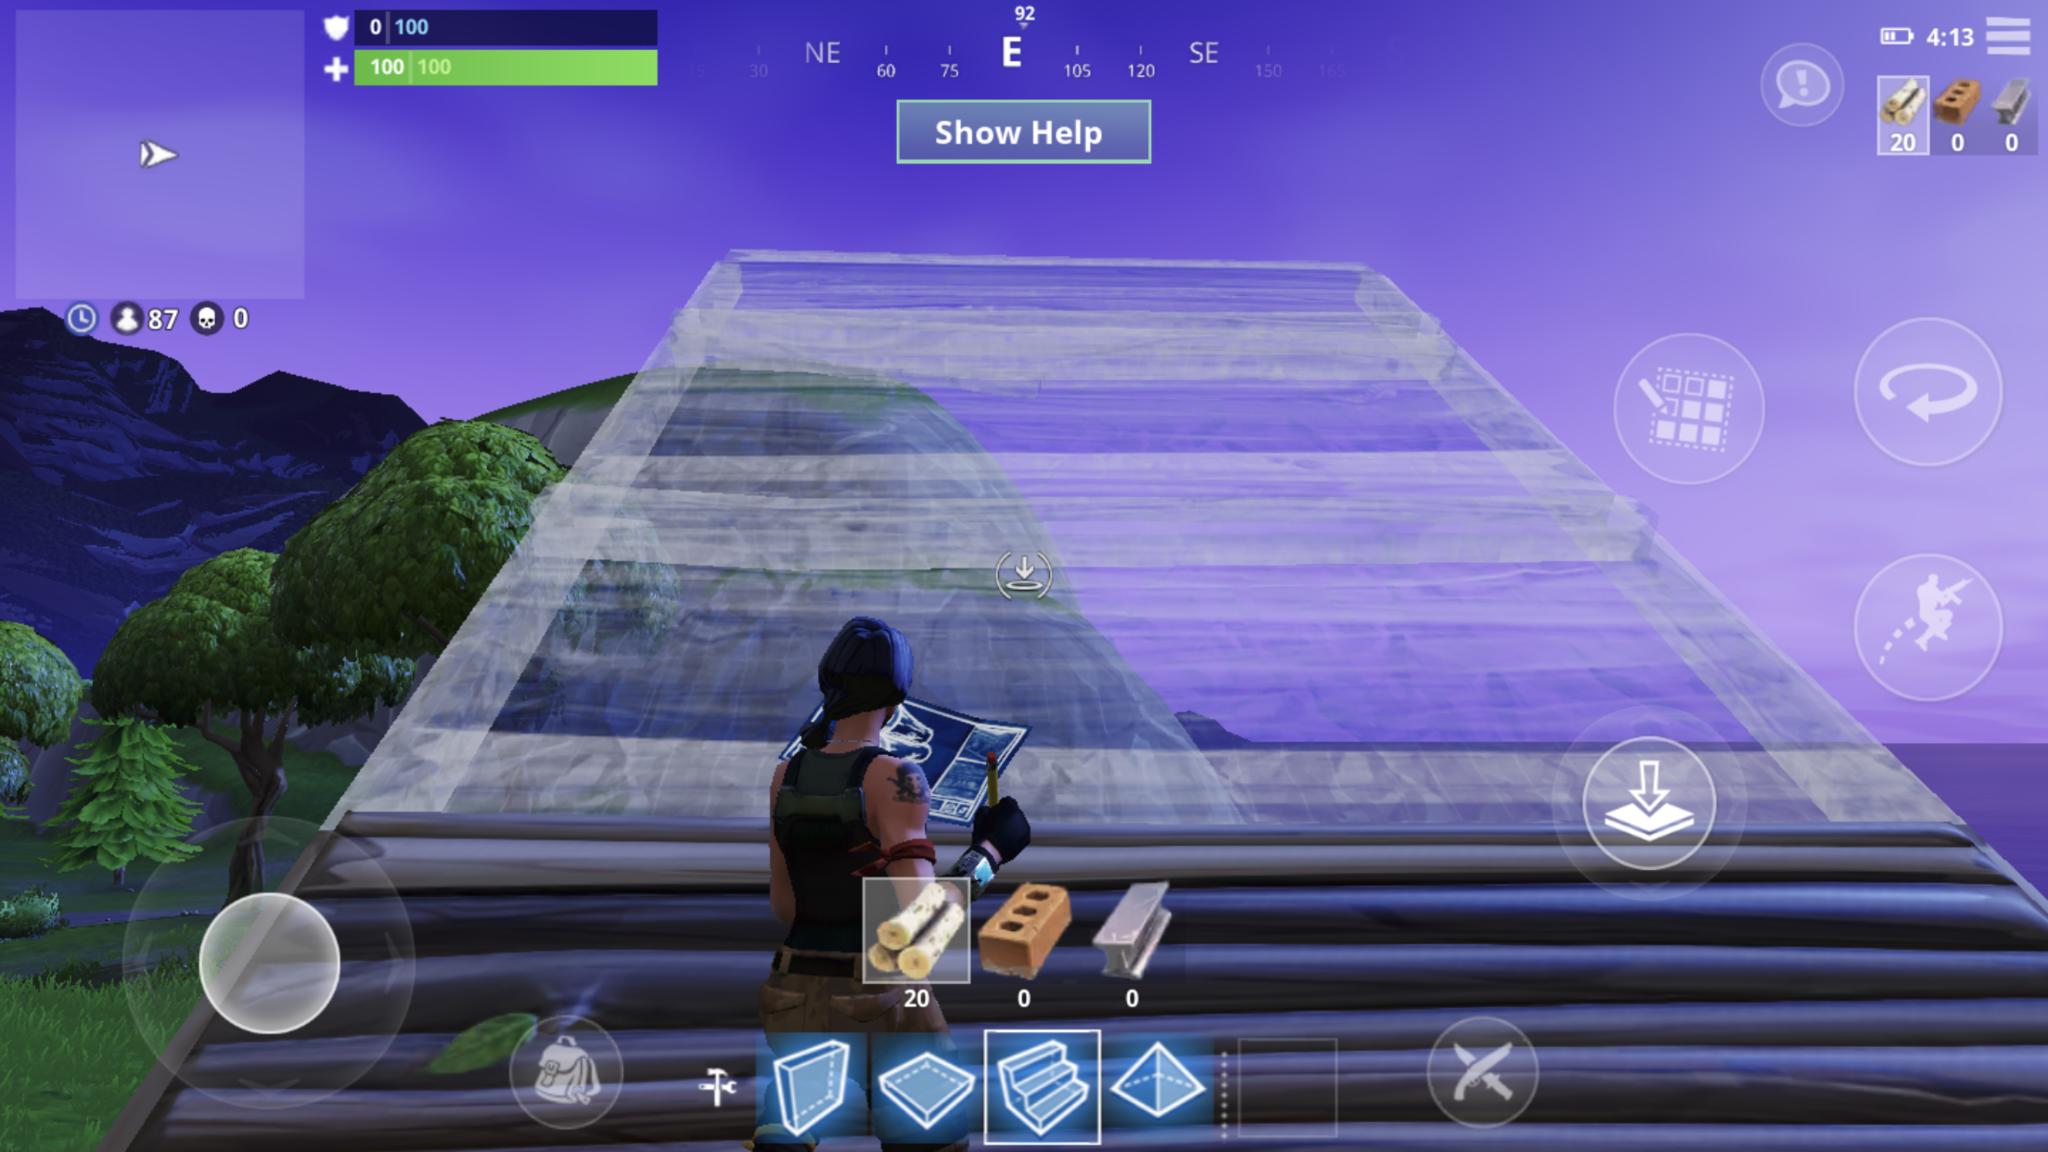 How To Control Fortnite On Iphone And Ipad Imore